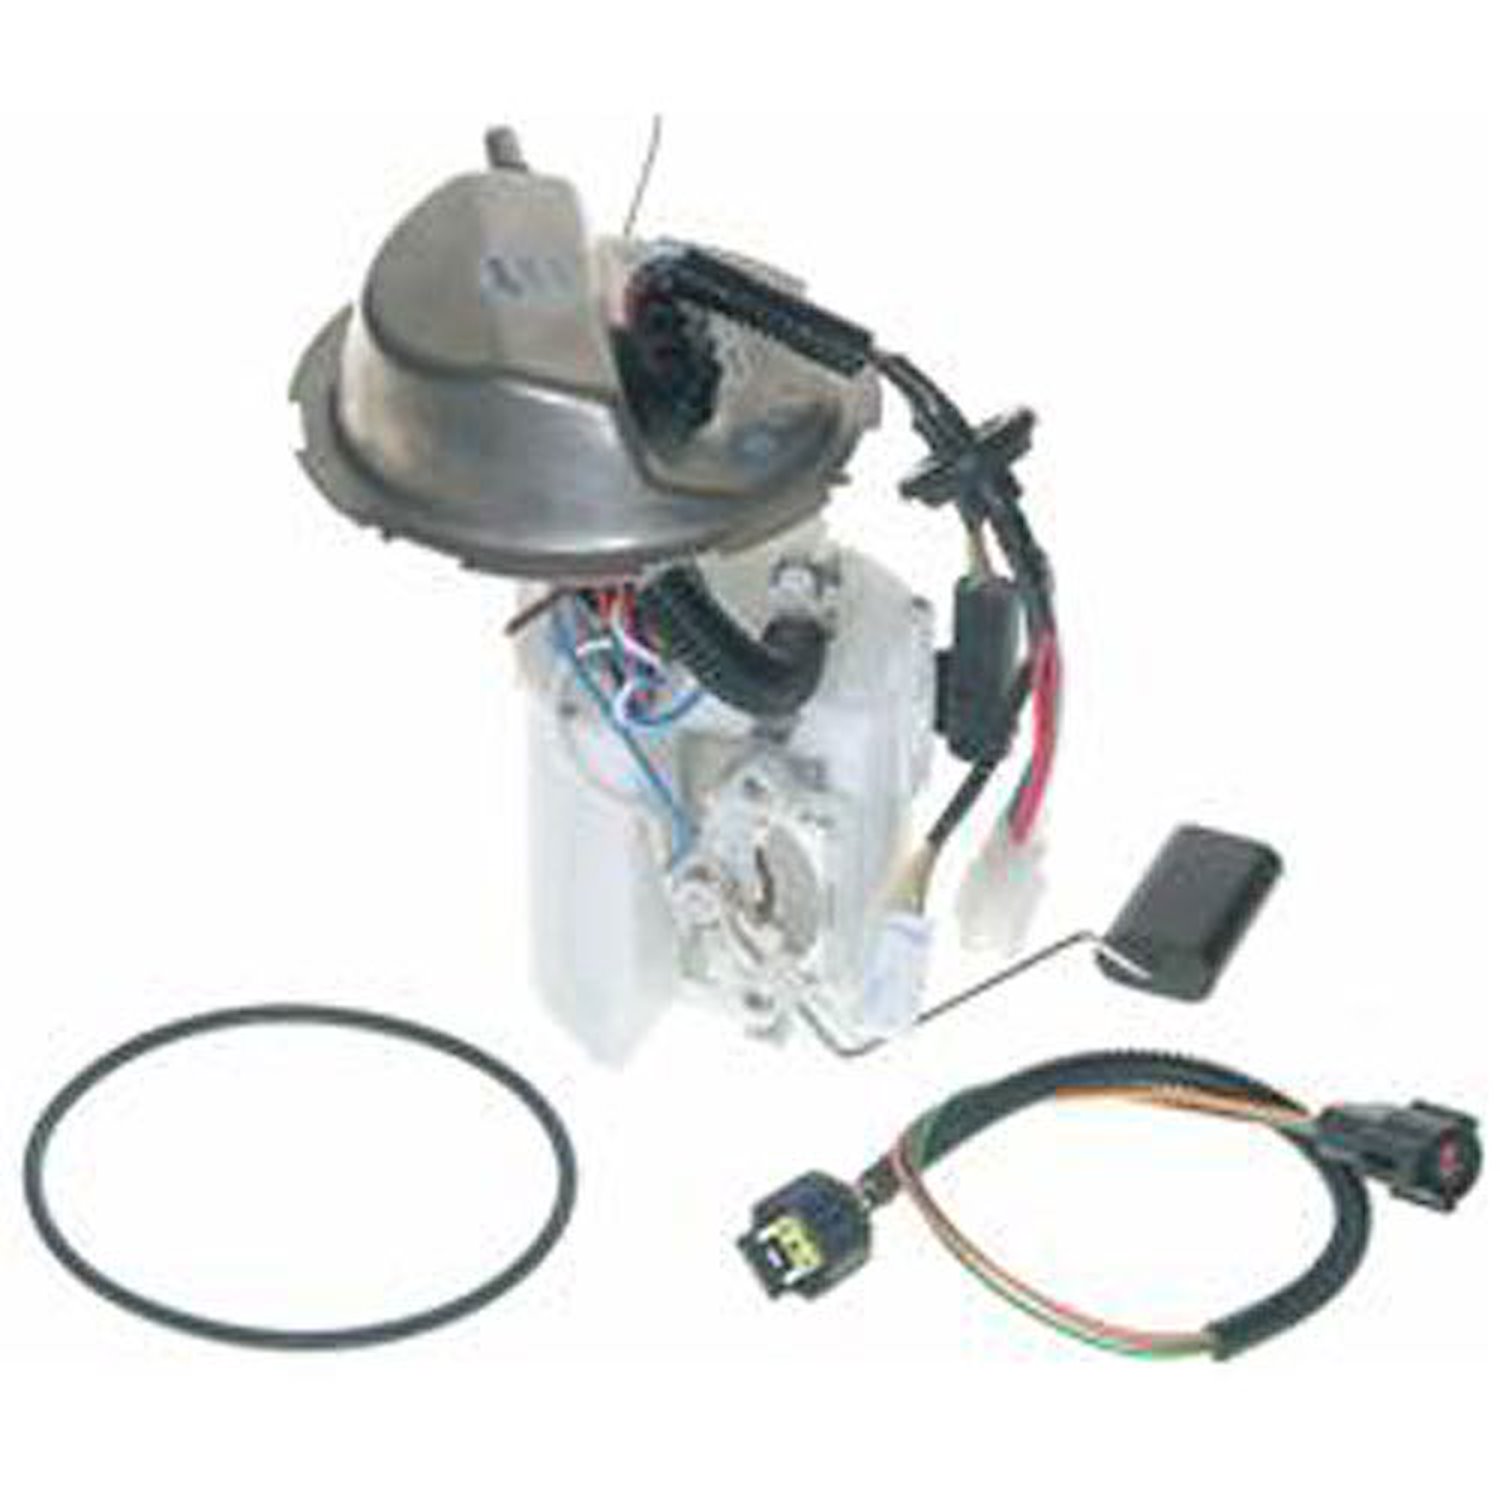 OE Ford Replacement Electric Fuel Pump Module Assembly 1999-02 Ford Contour 2.0L/2.5L 4 Cyl